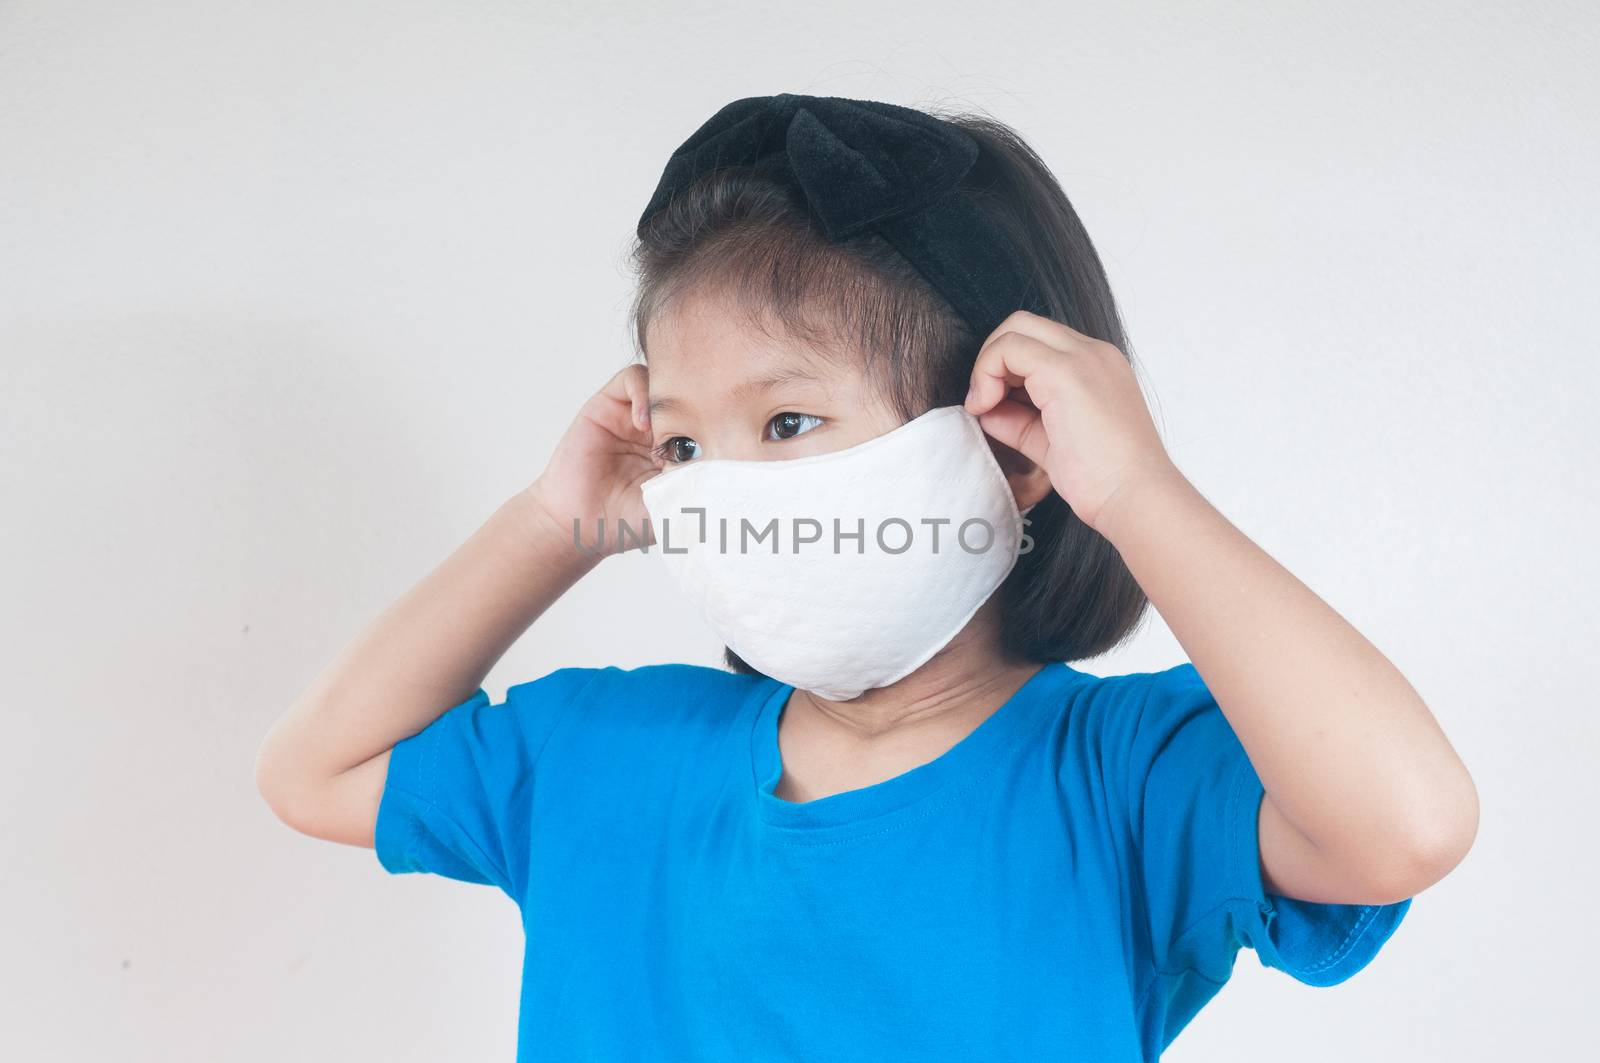 Asian child Girl or kids in blue Shirt wearing cloth mask to protect Covid 19 virus infection as medical safety prevention concept against white background.